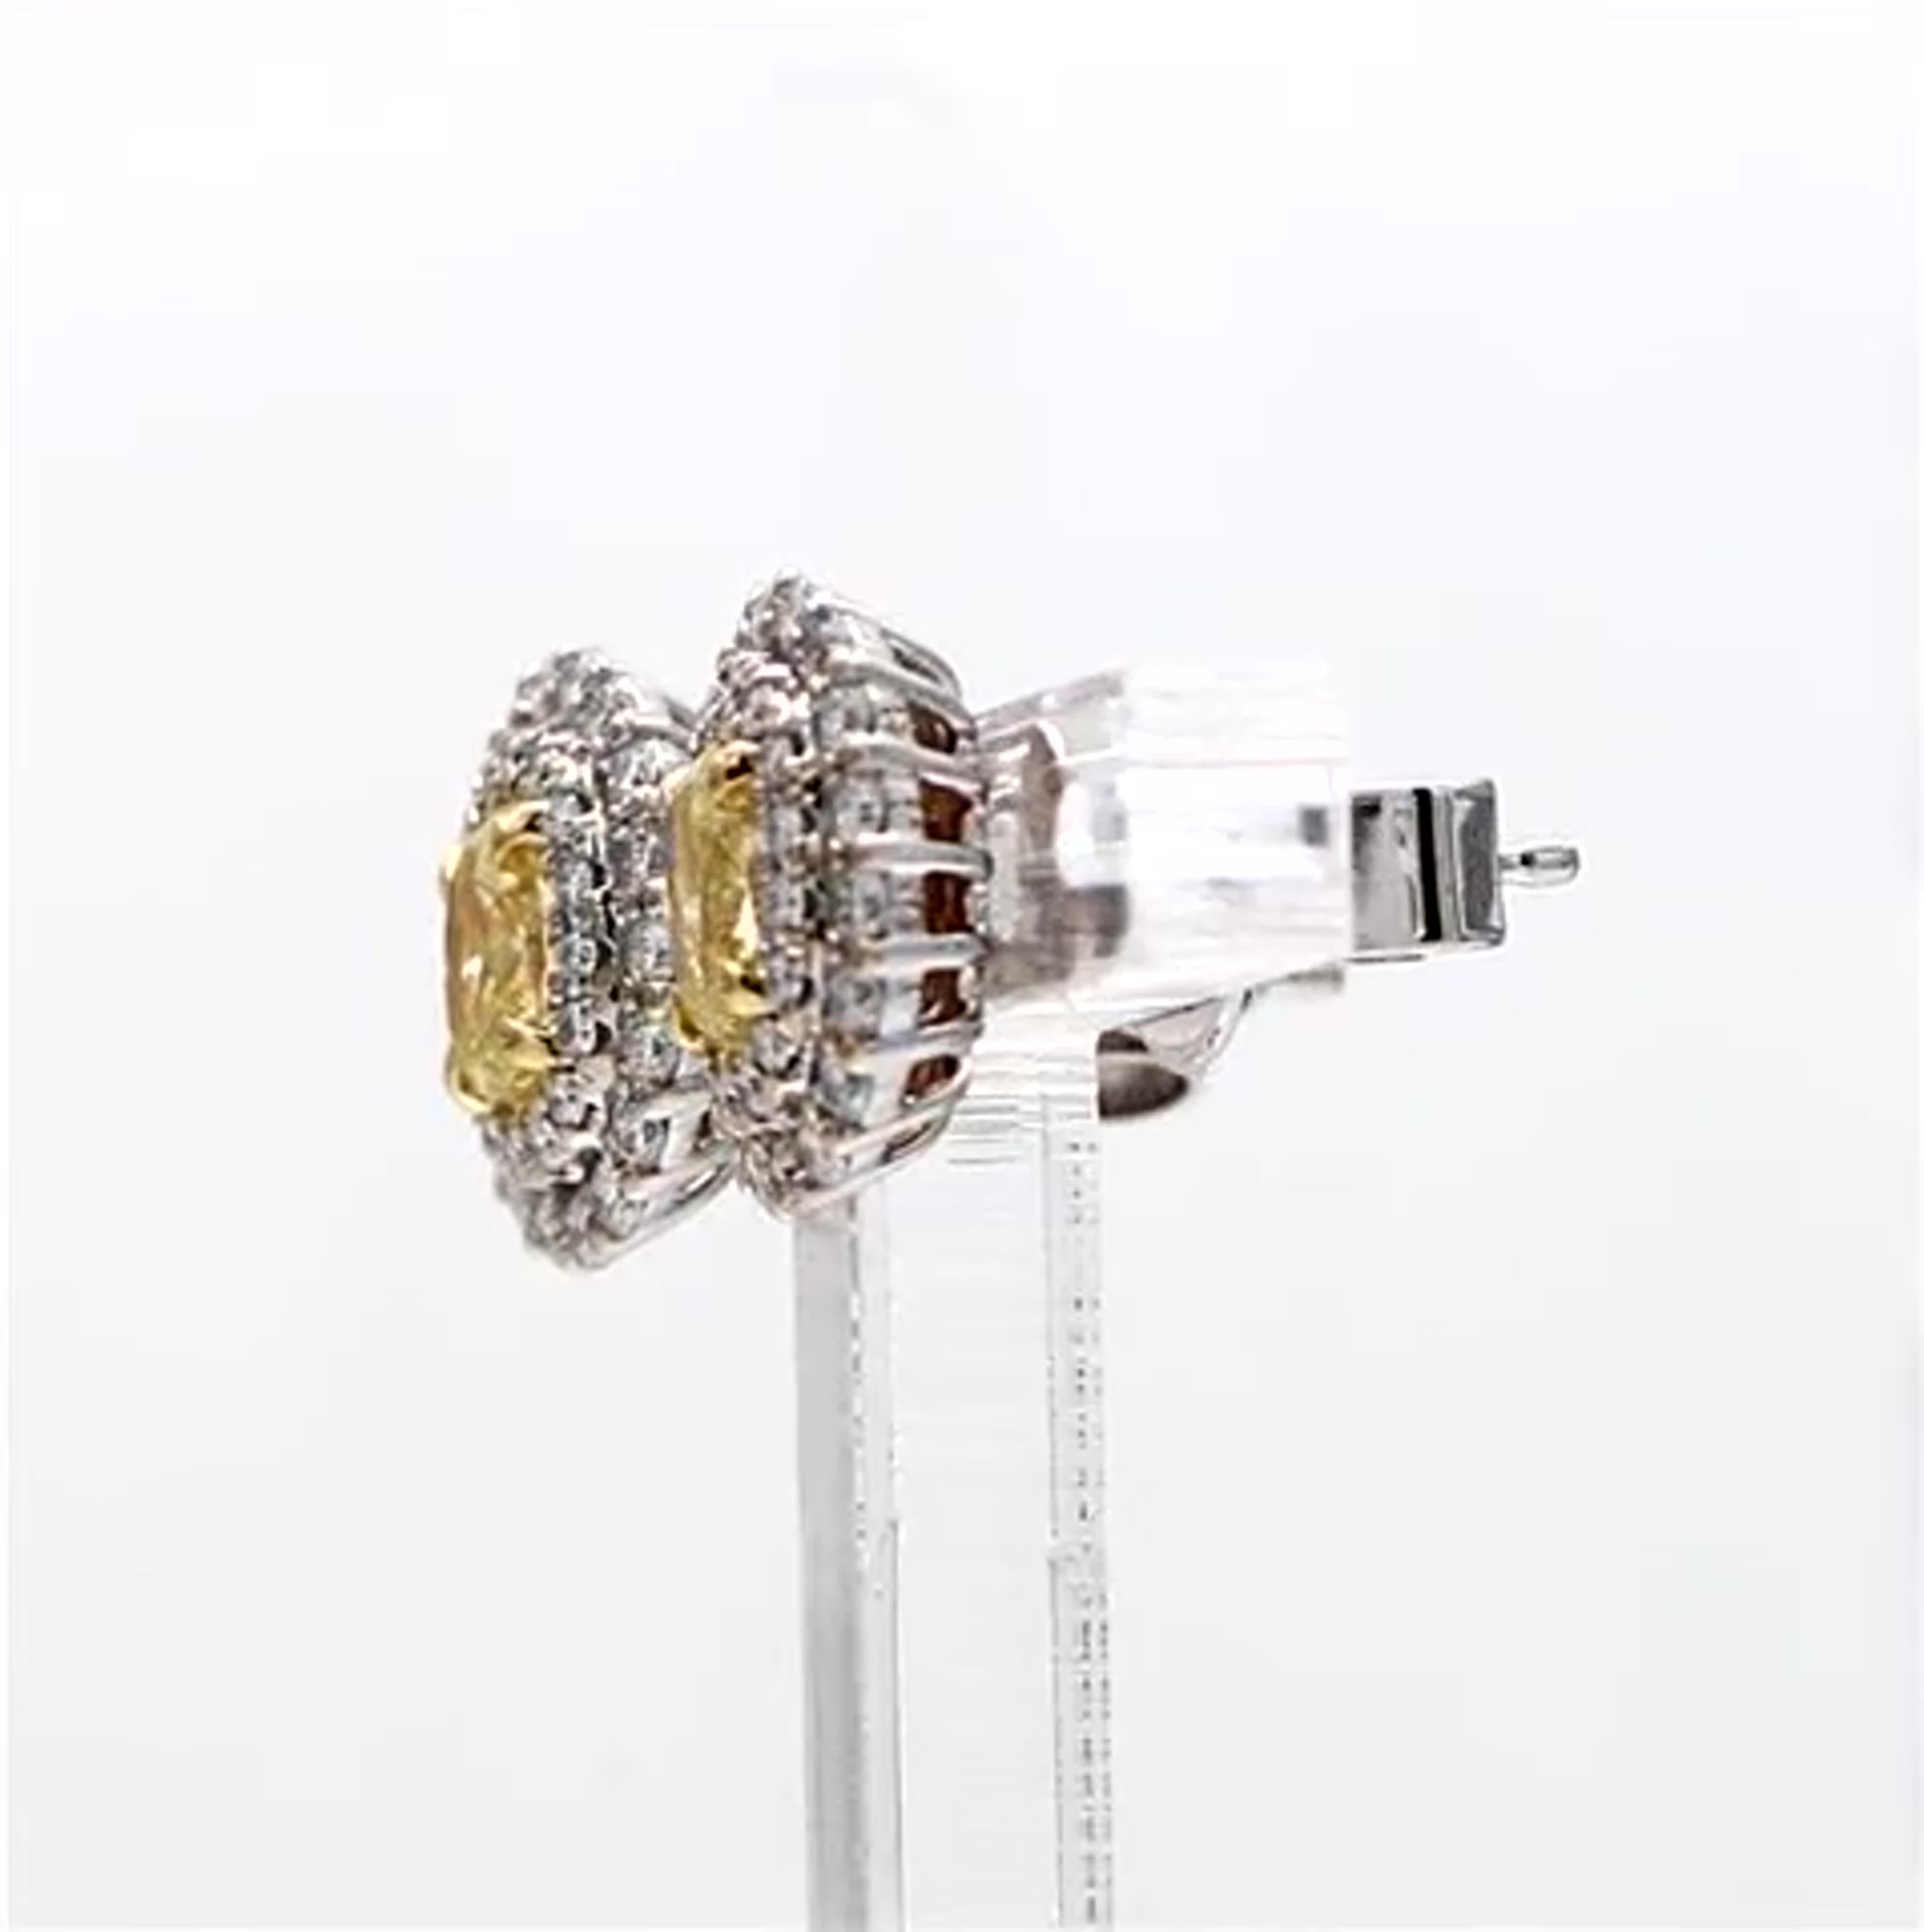 Natural Yellow Oval and White Diamond 1.02 Carat TW Gold Stud Earrings